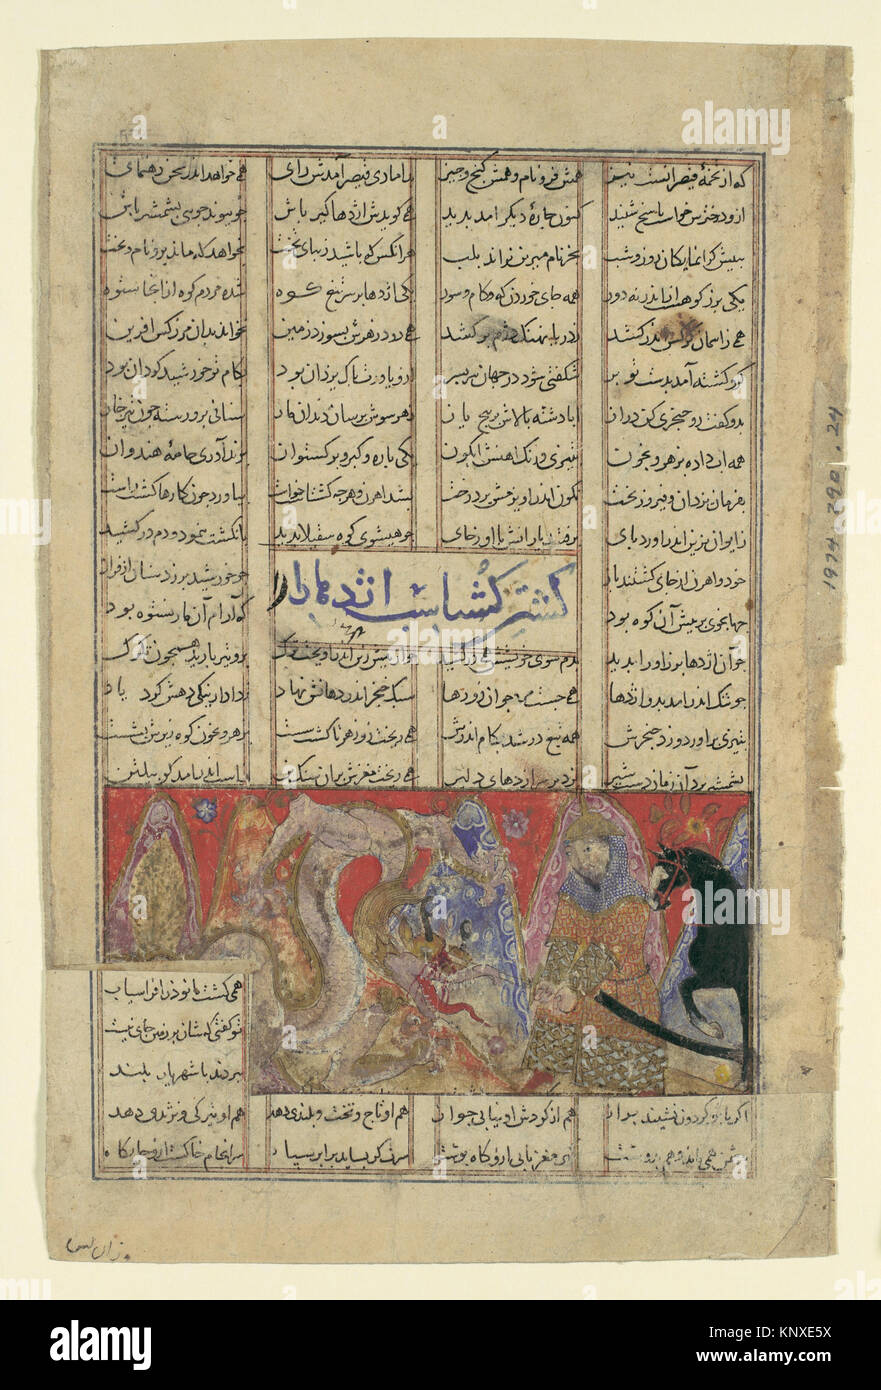 Gushtasp Slays the Dragon of Mount Saqila , Folio from a Shahnama (Book of Kings) of Firdausi MET DP108573 Gushtasp Slays the Dragon of Mount Saqila , Folio from a Shahnama (Book of Kings) of Firdausi MET DP108573 /452649 Stock Photo